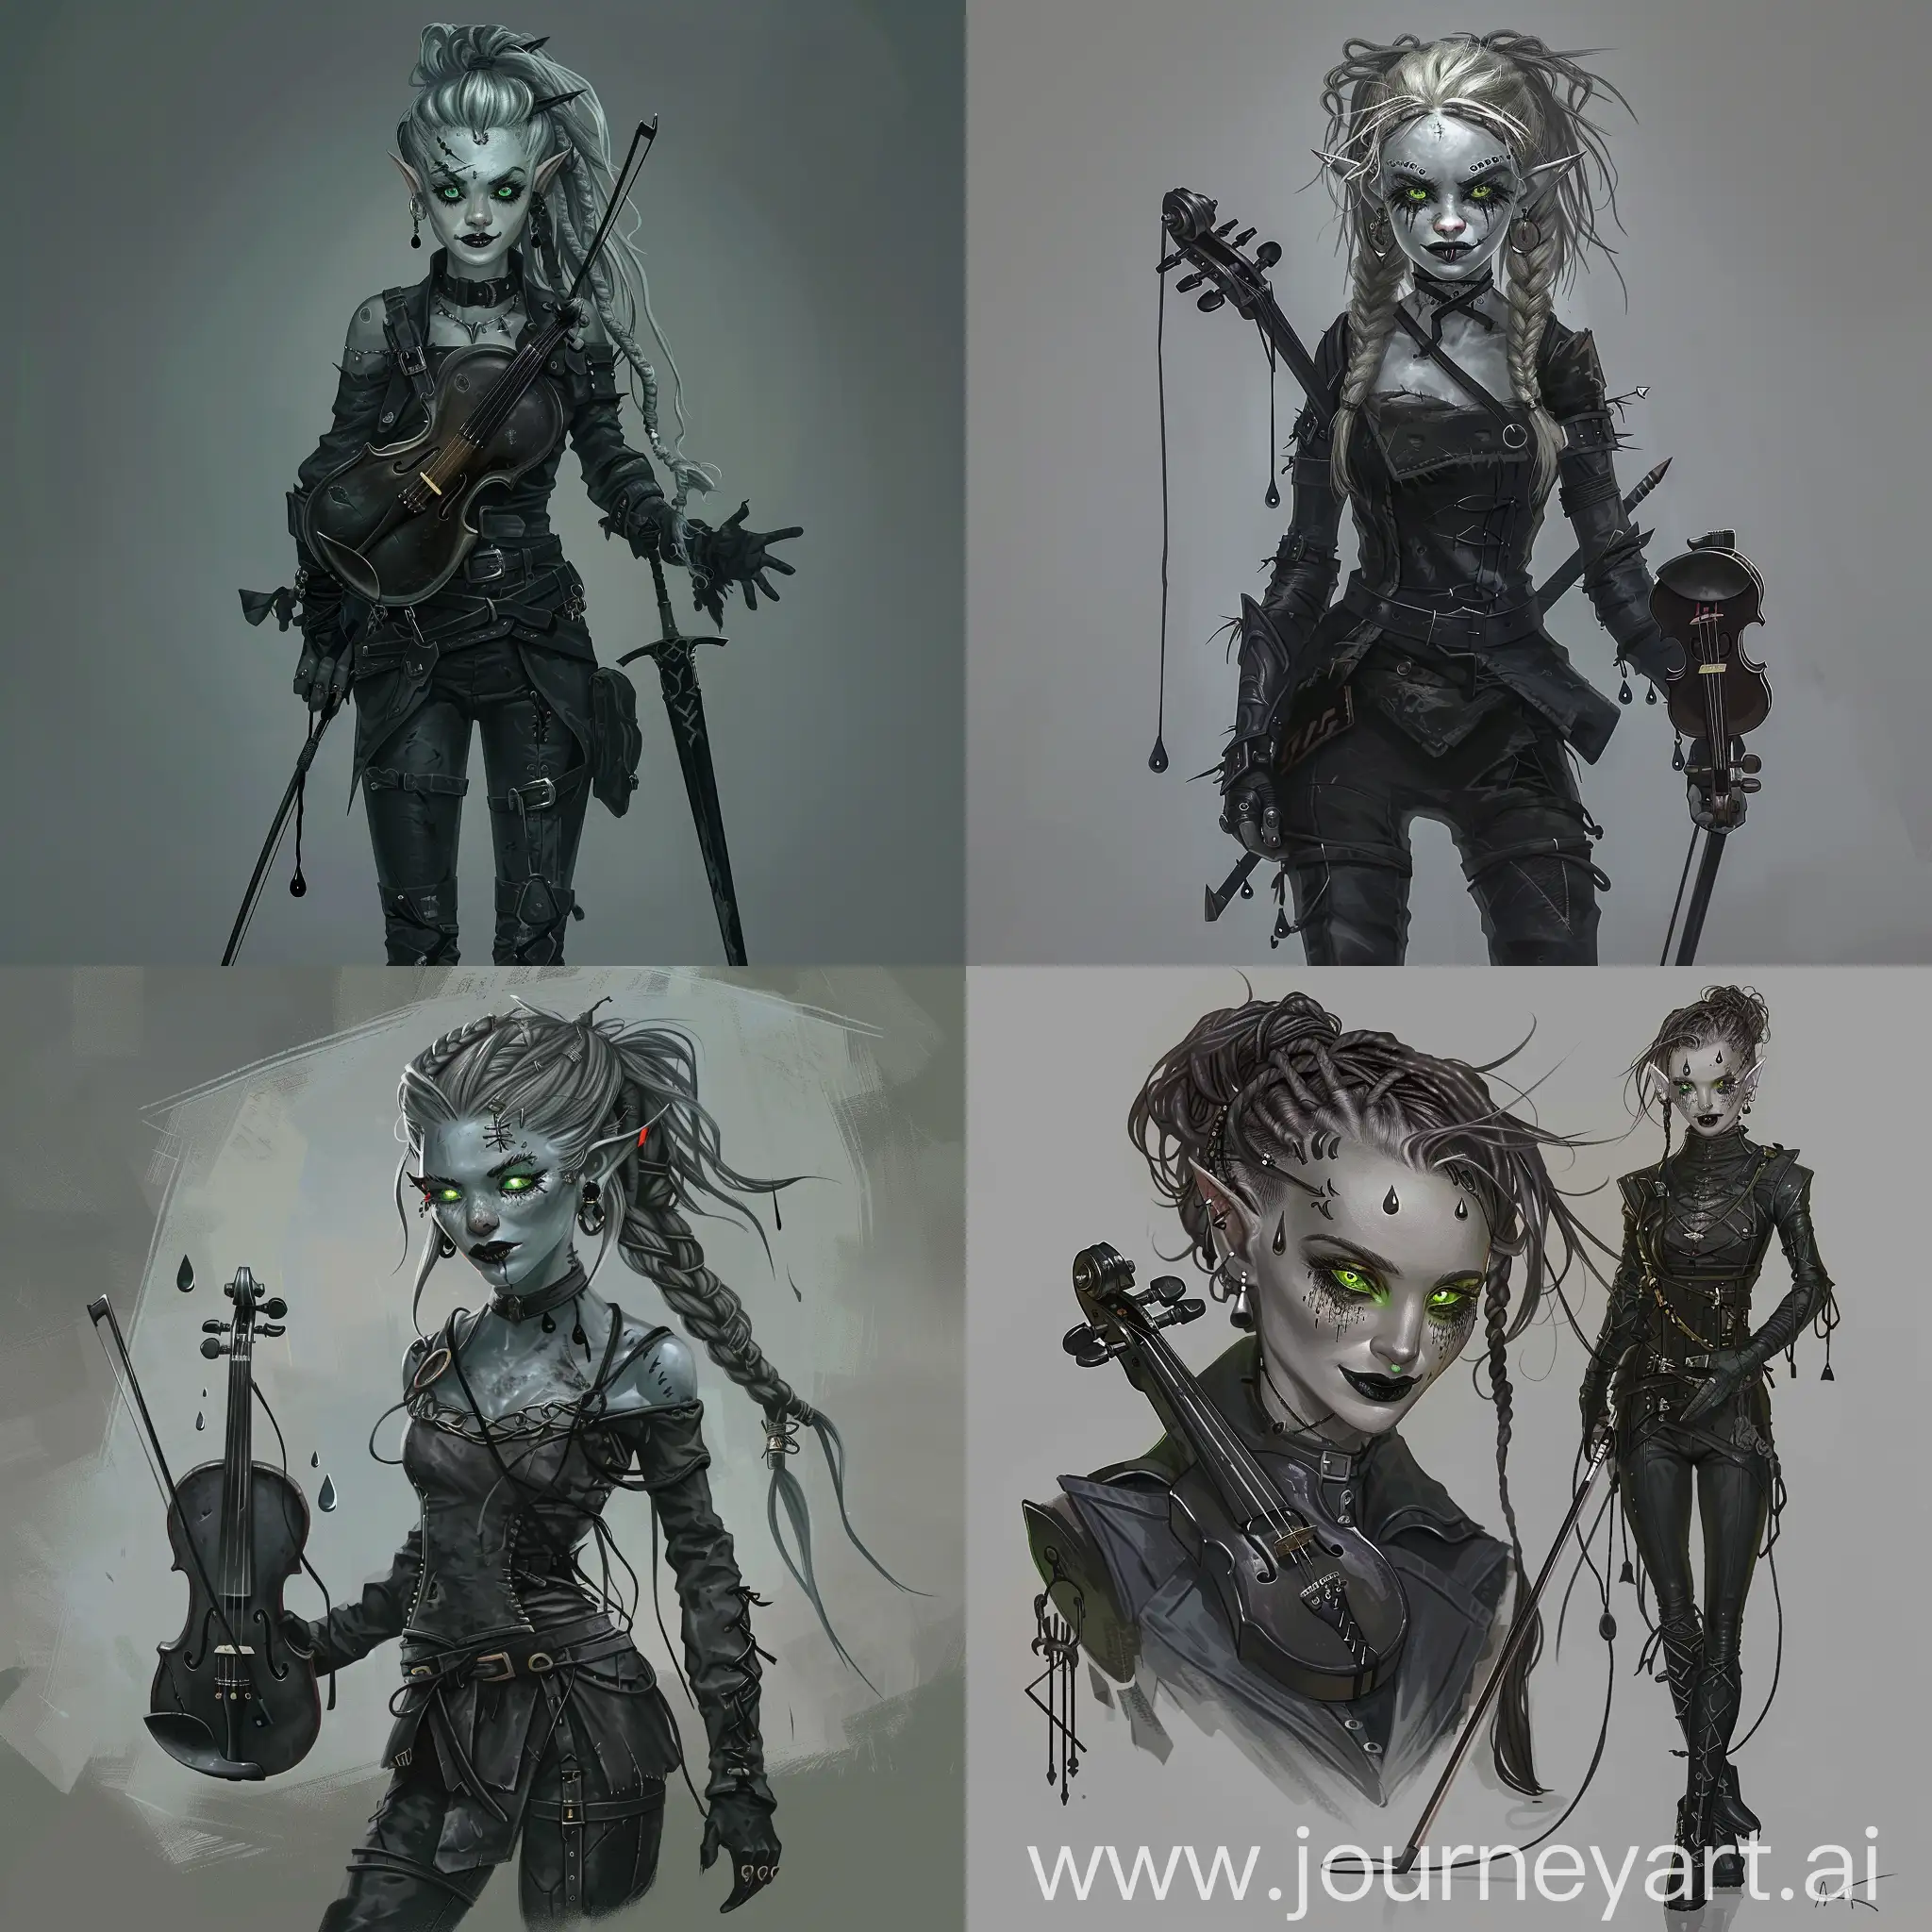 Character concept art. Full body. Young woman dark elf (Drow) with pale skin color and ash braided hair. She has messy hairstyle, dark green glowy eyes, dark lips and black teardrops. Her look is sadistic and evil (crazy) smile. She has eyebrow piercing, ear piercing, black slim leather armor, violin in left hand, rapier in right hand (she play violin by the rapier). She wear strict shirt with open neck and long sleeves and high pank black shoes. She look like bard from DnD. Midnight. Image is sinister and in dark gray tones.